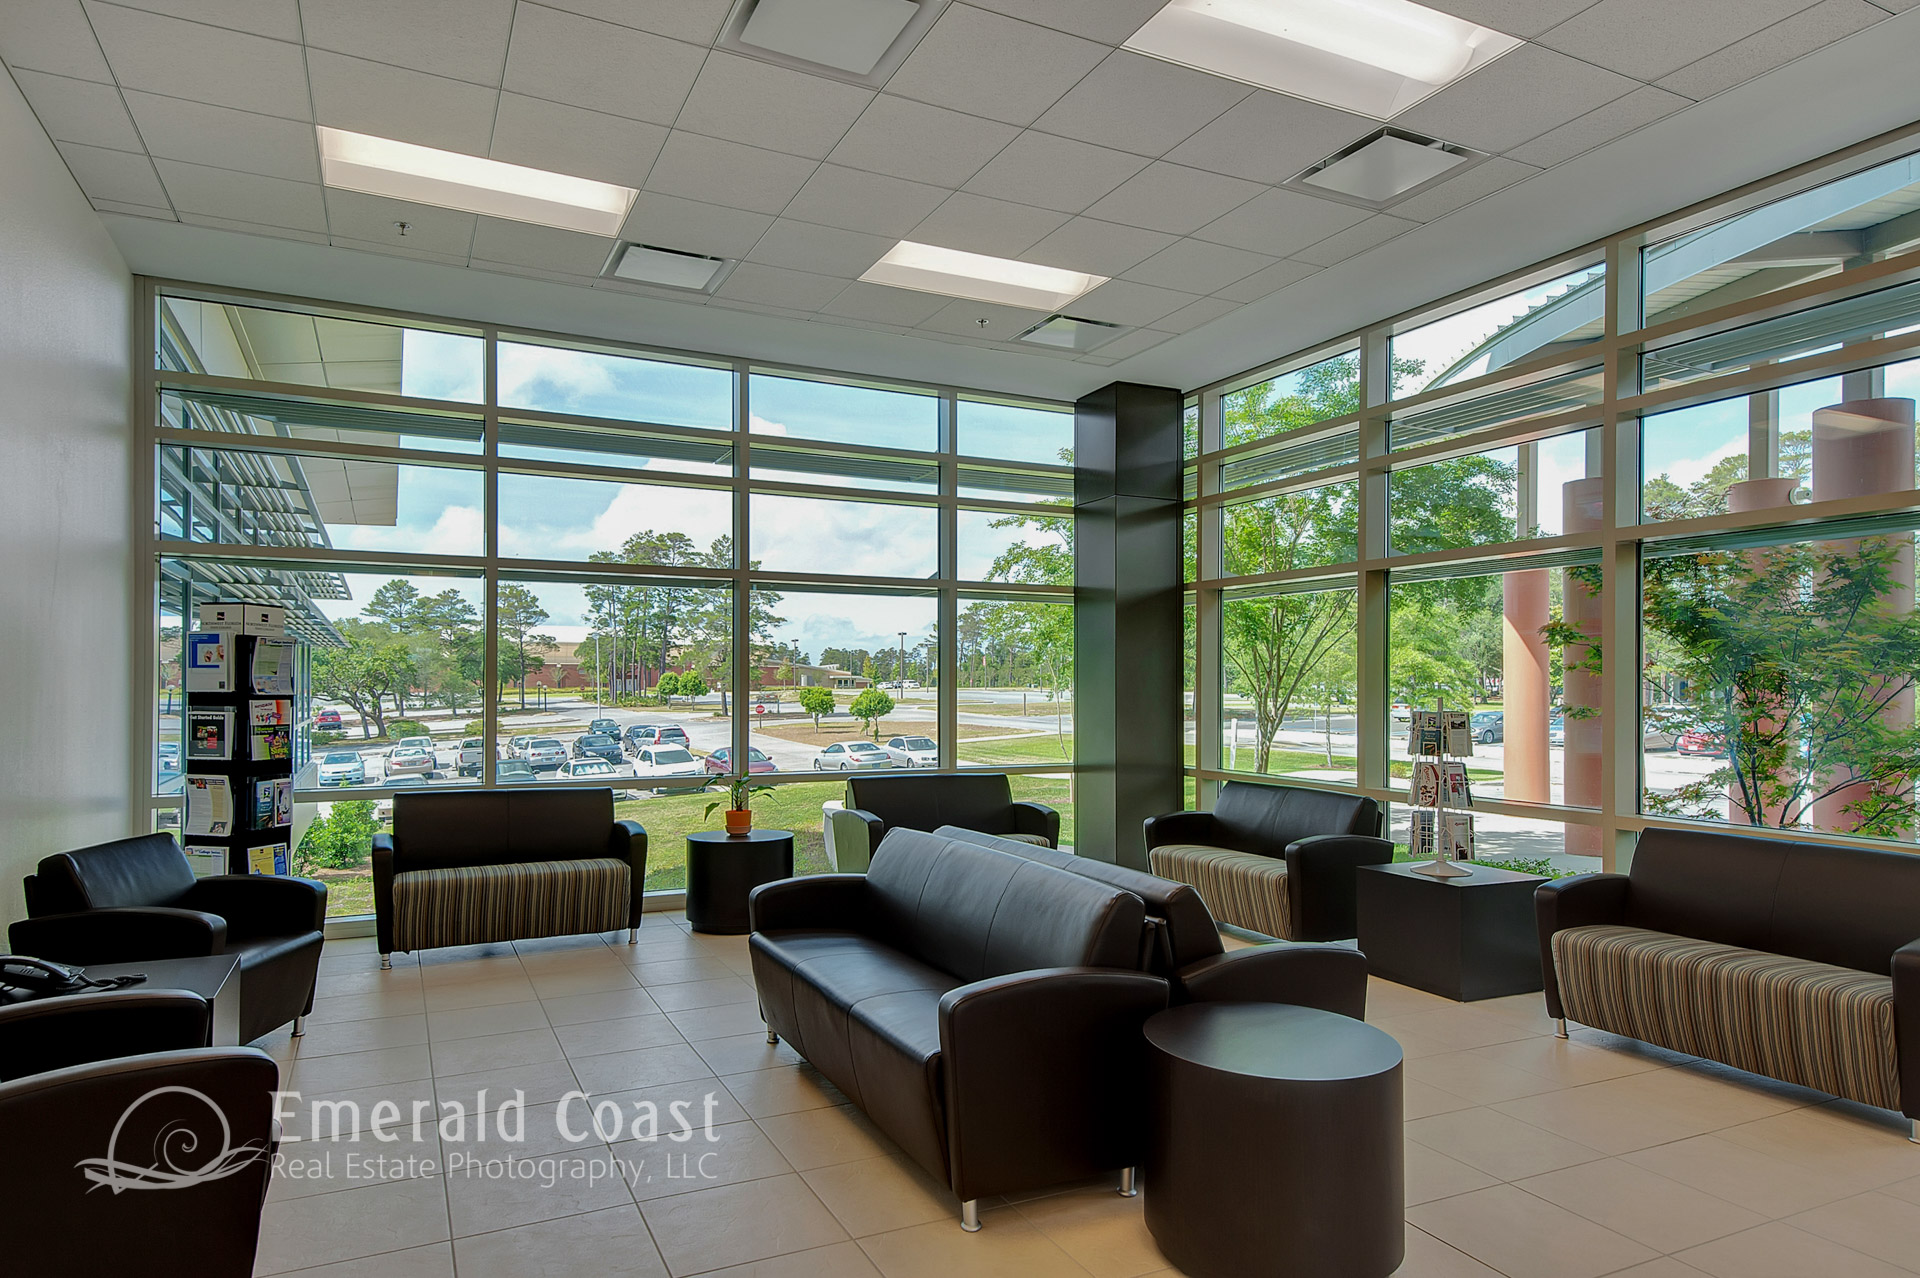 NW Florida State Student Life Center Lobby